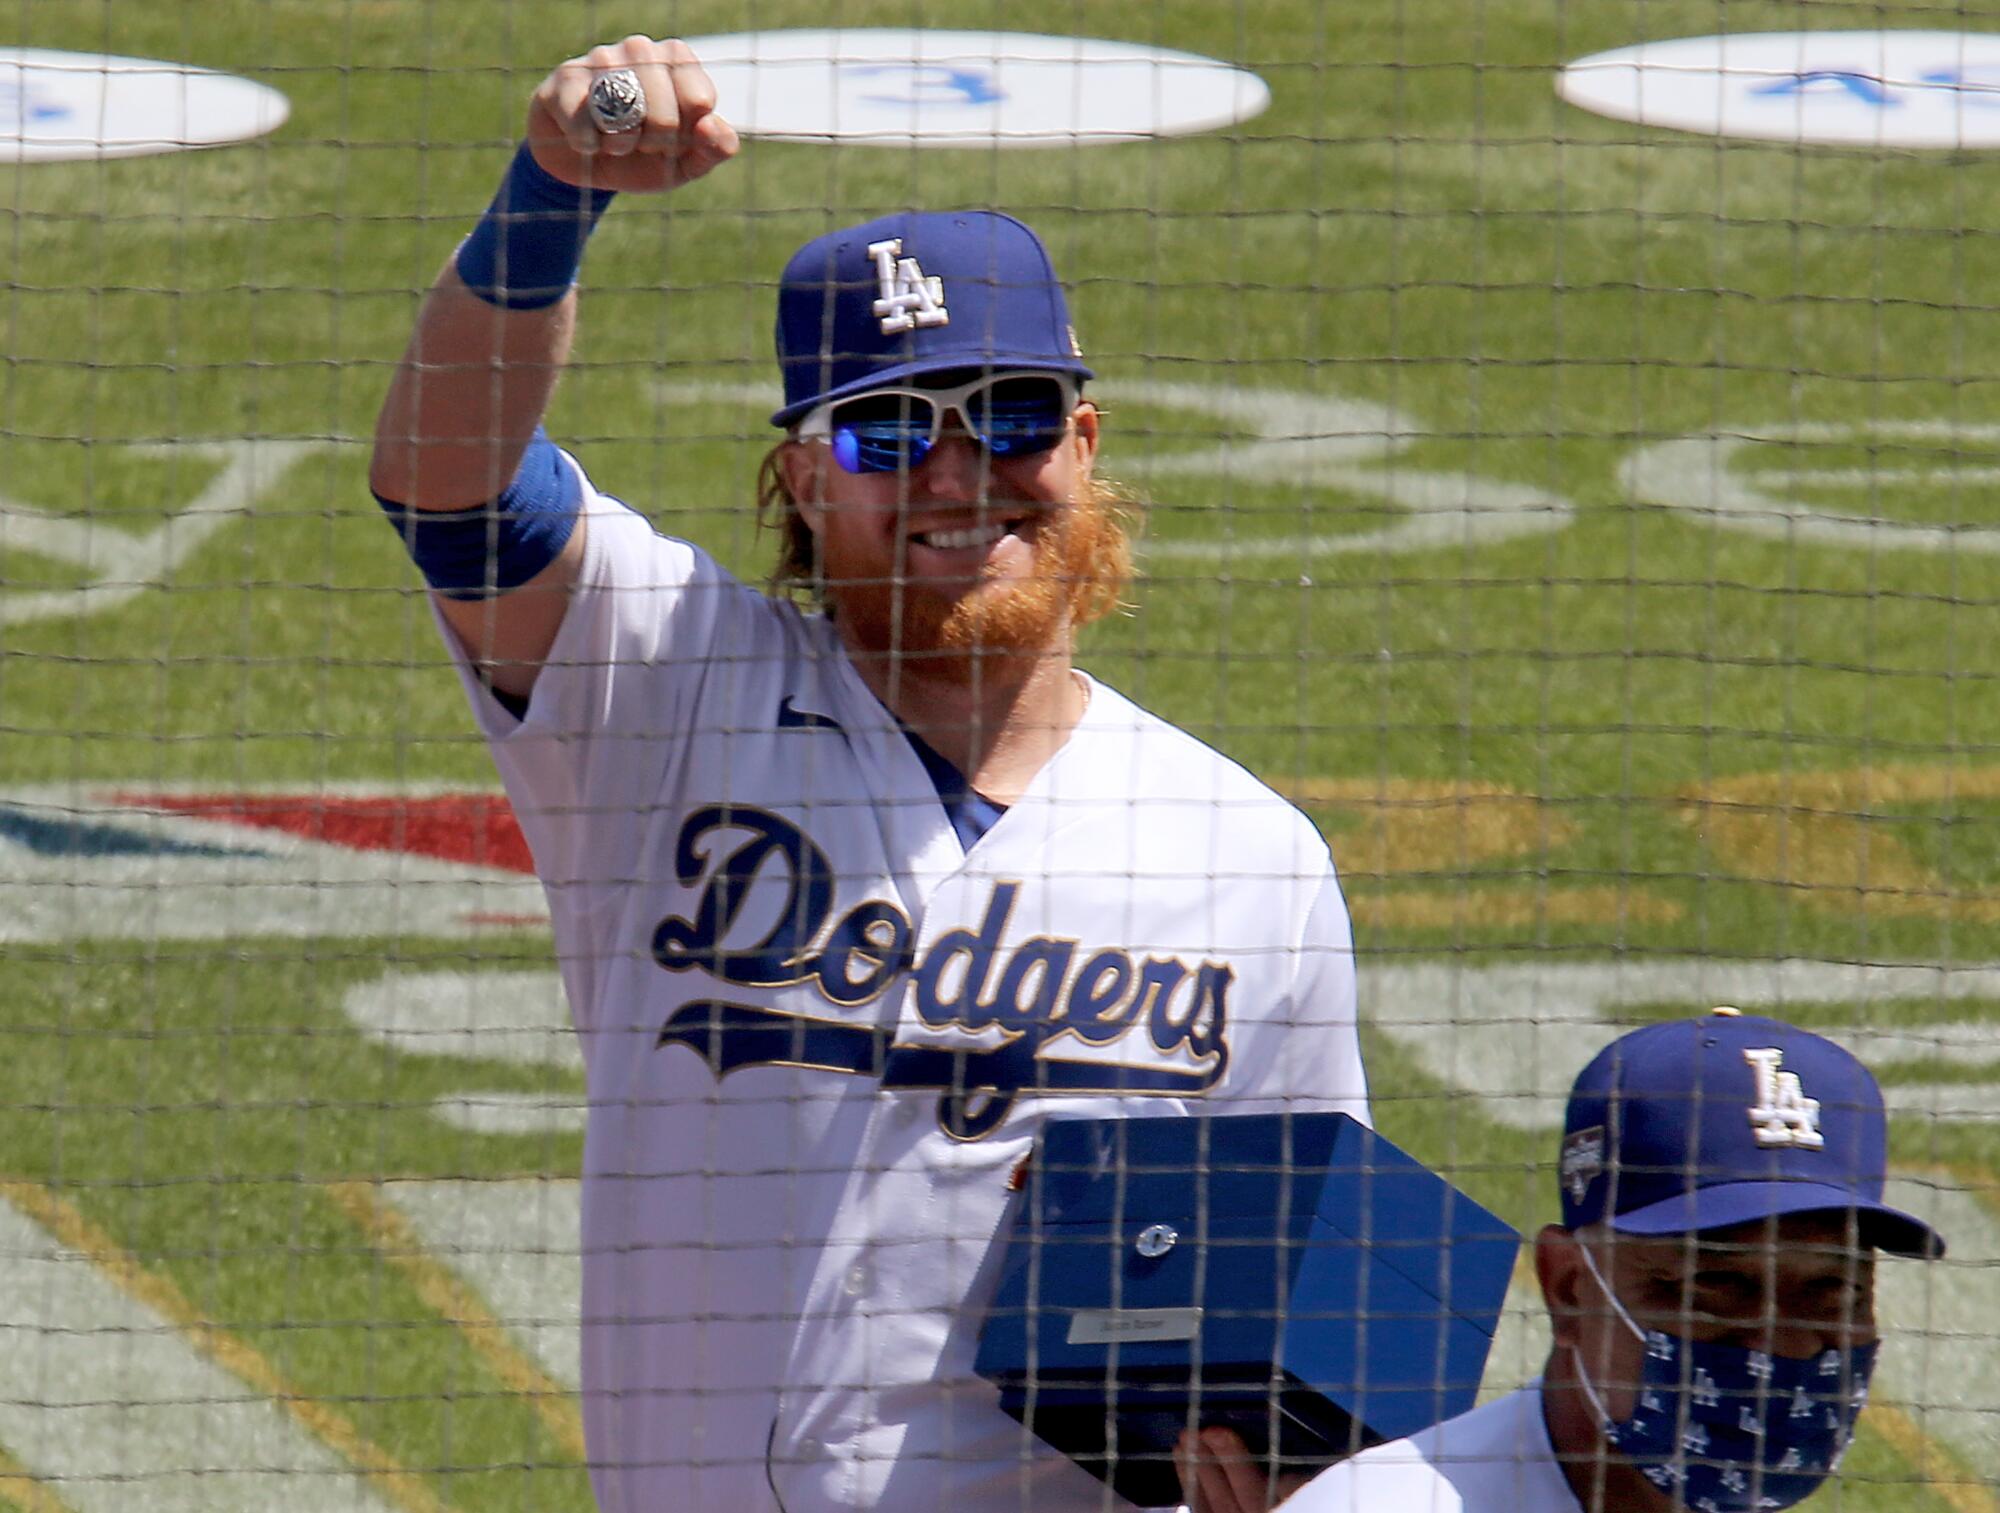 The Dodgers' Justin Turner celebrates after getting his championship ring during a ceremony before the home opener.